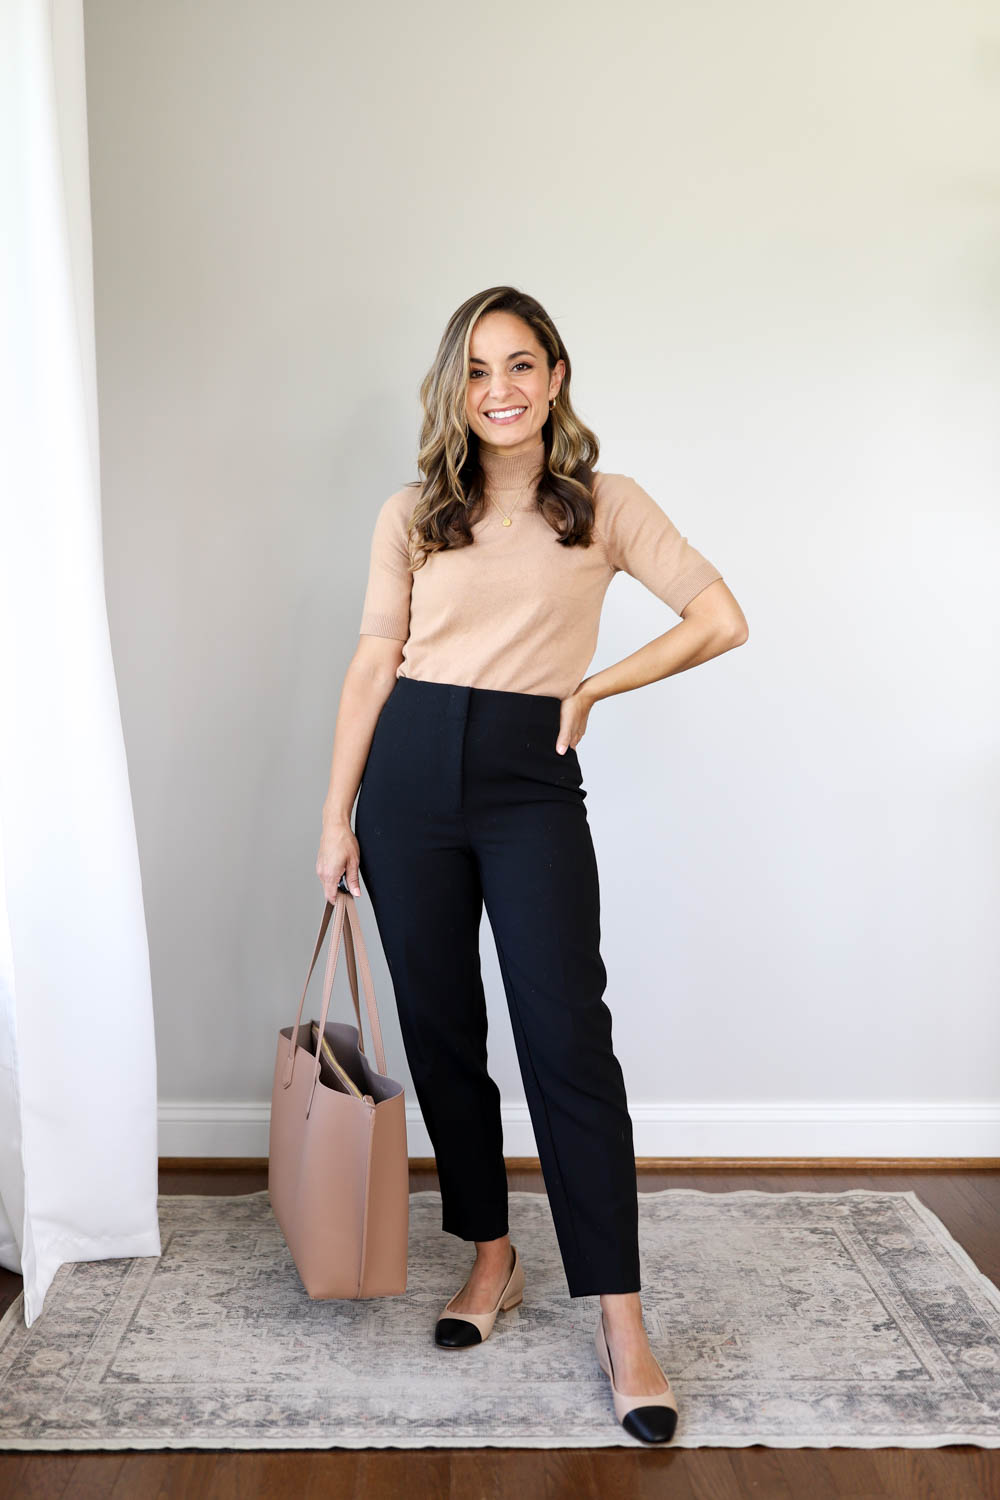 Petite-friendly outfits for work via pumps and push-ups blog | petite style blog | petite fashion | business casual outfits 